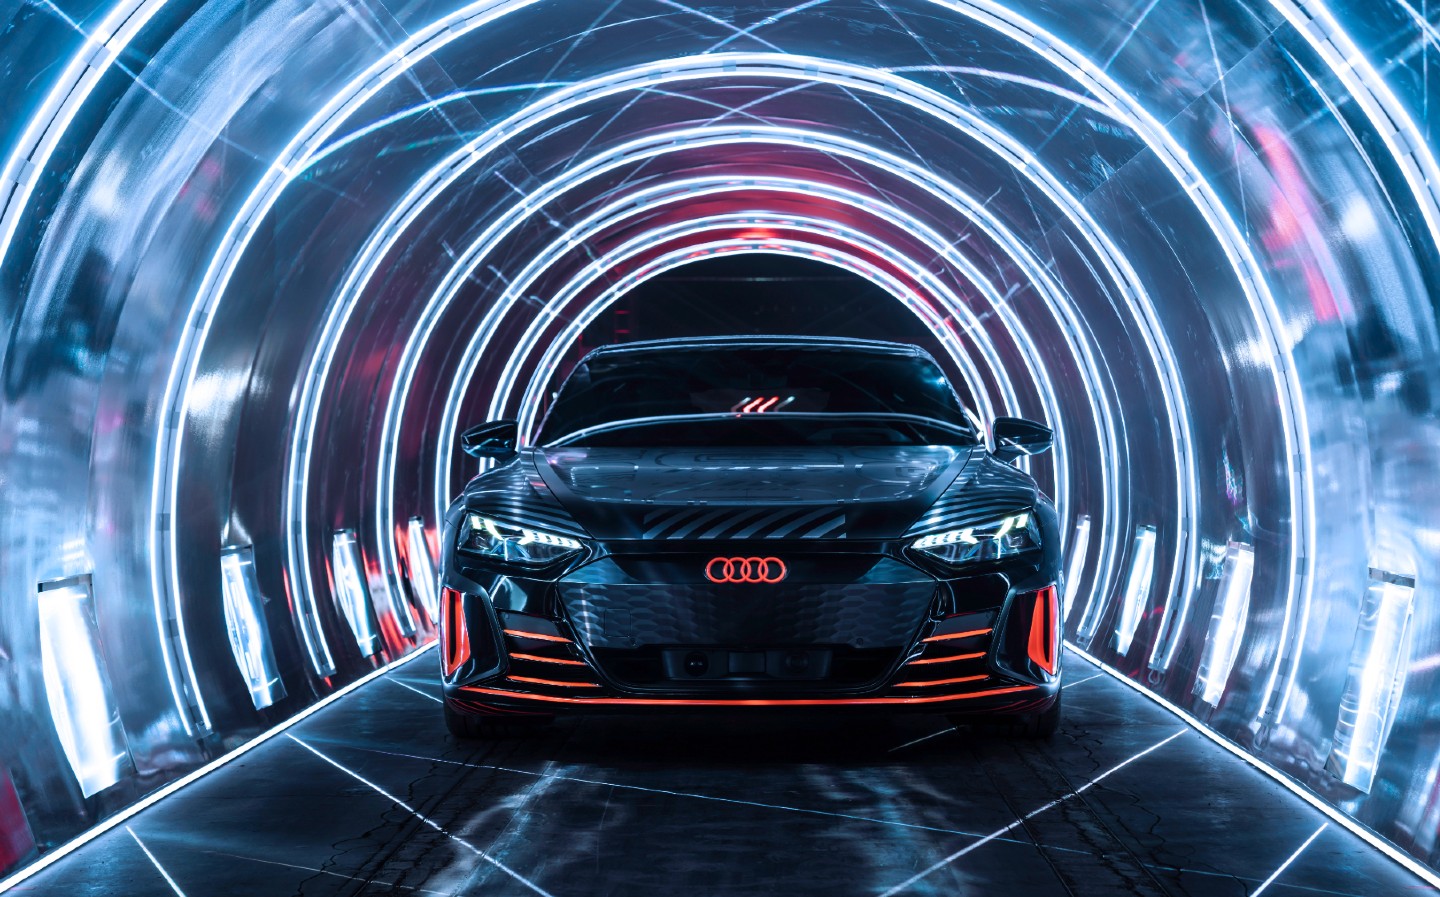 2021 Audi e-tron GT and RS e-tron GT revealed: specs, range, price, UK on sale date